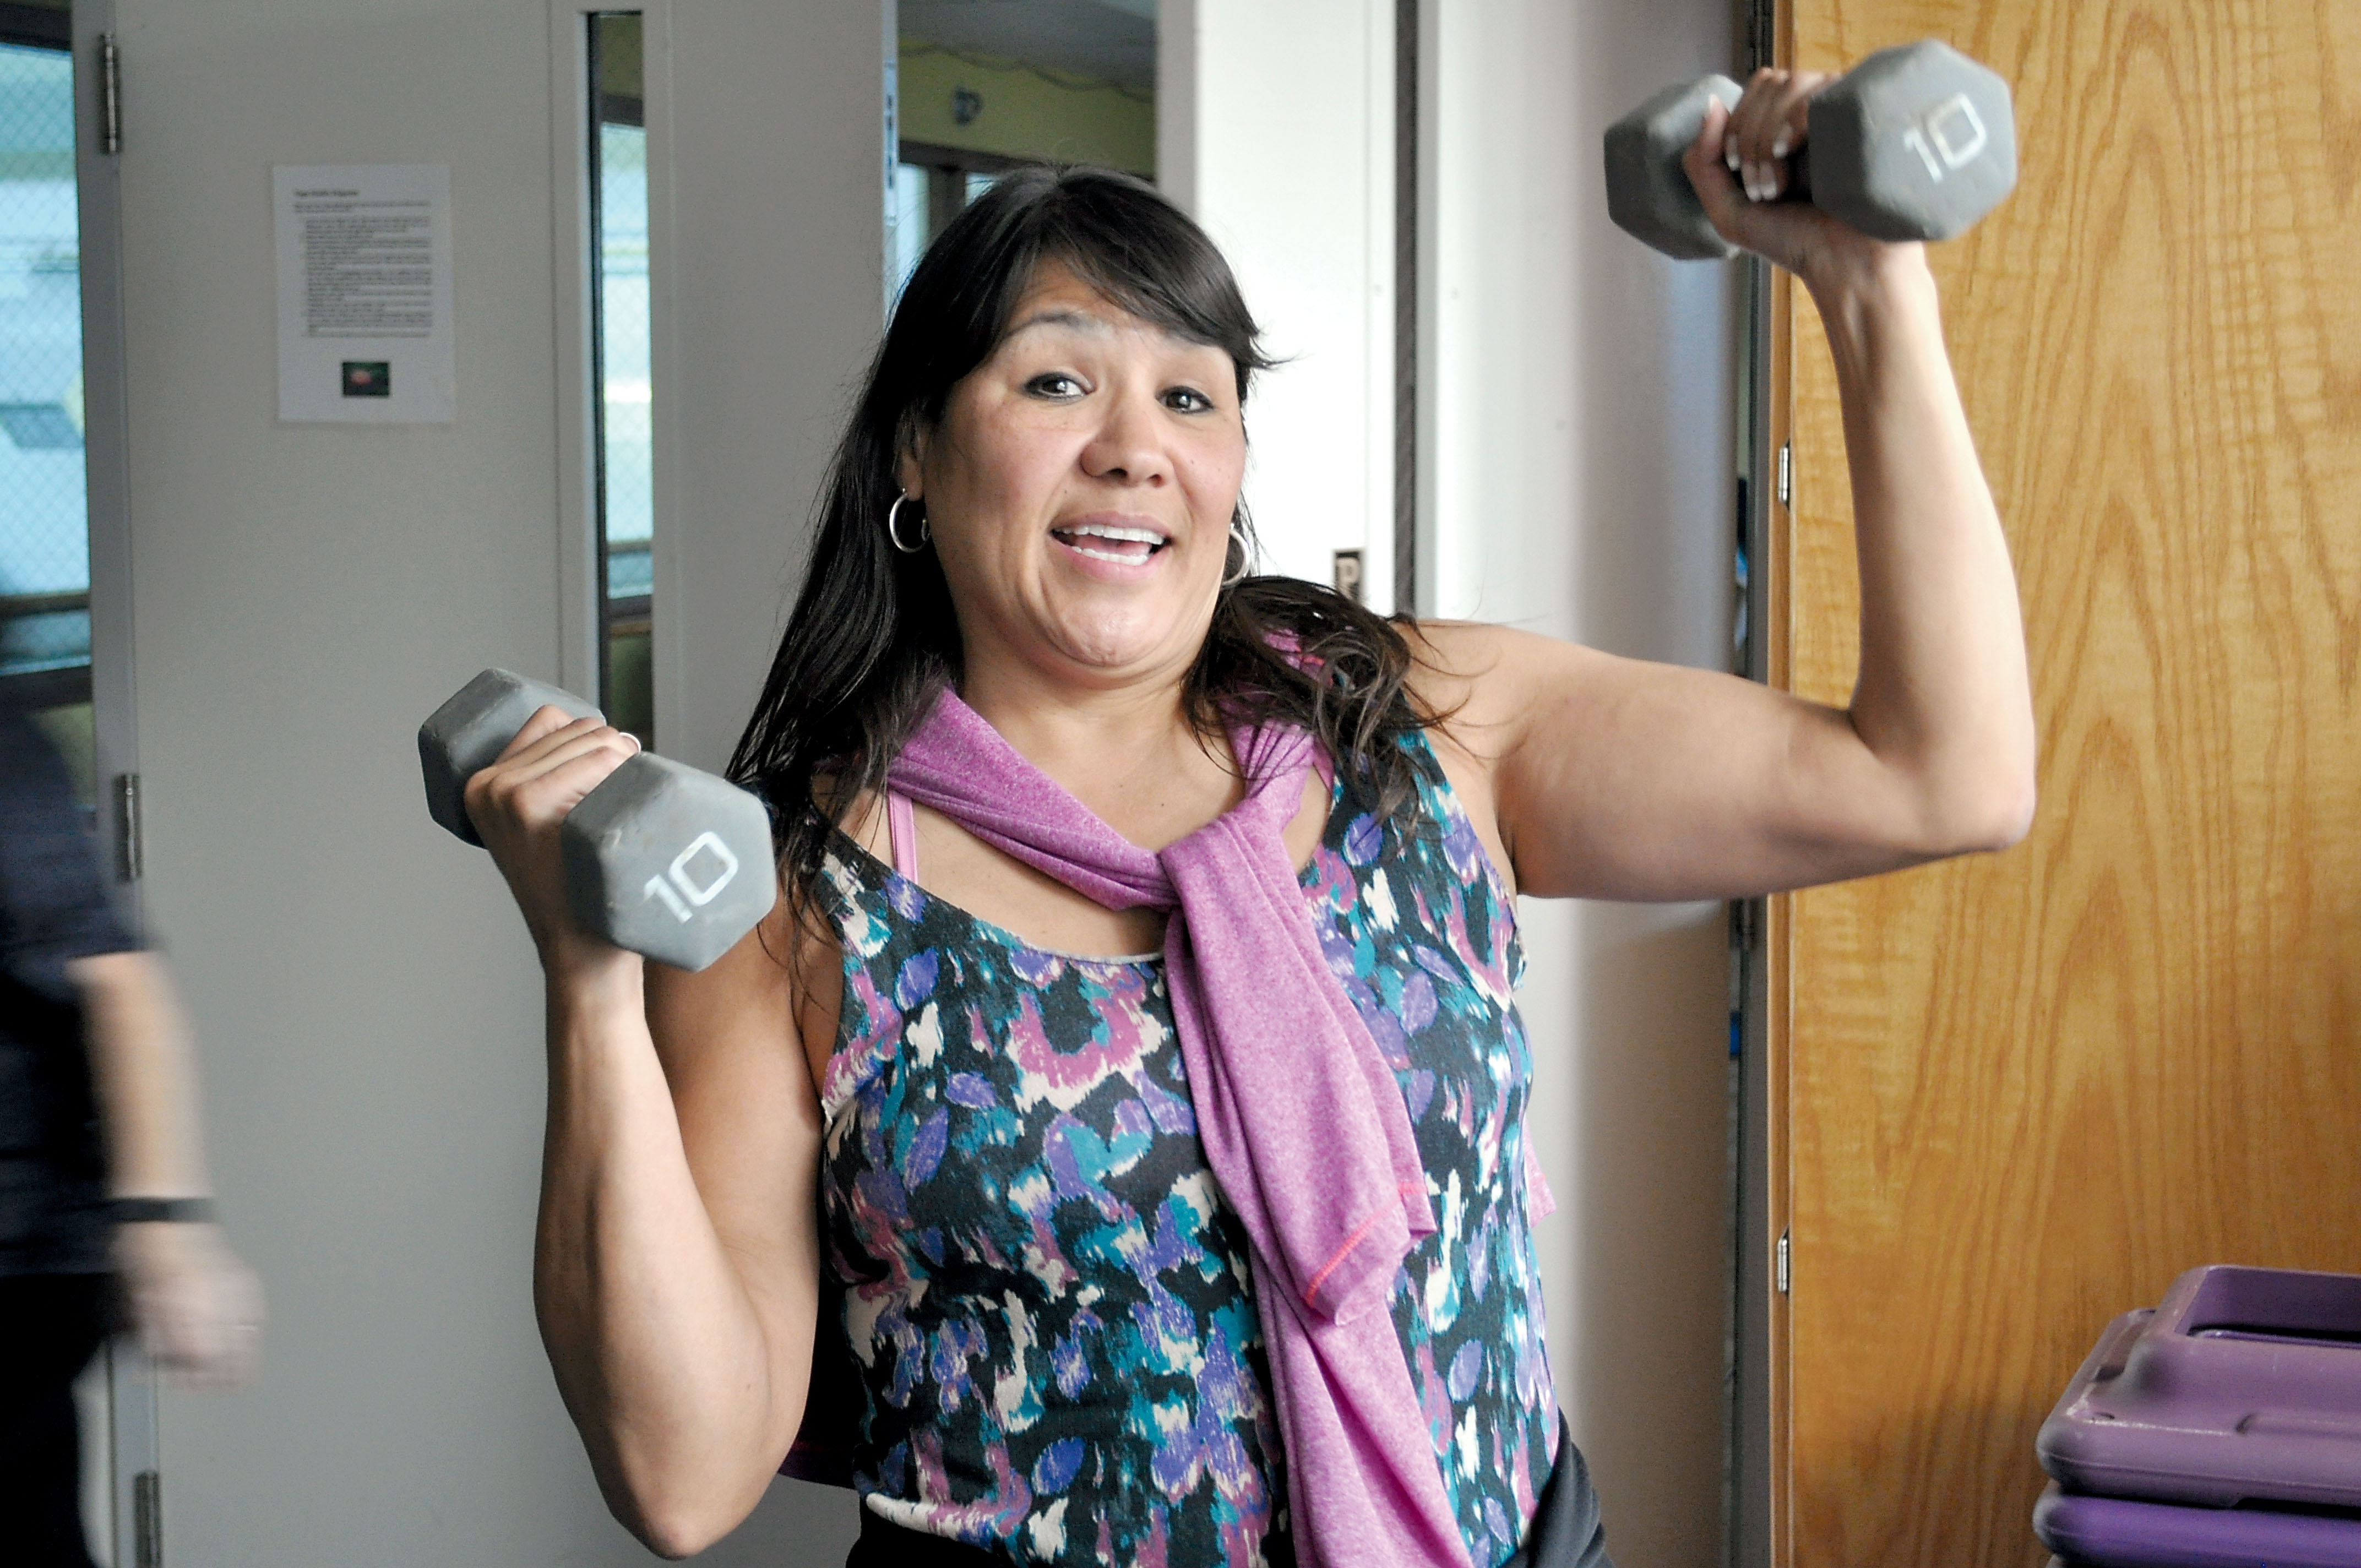 Sequim fitness instructor Shelly Haupt is pumped about attending the first World Indigenous Games in Brazil this month. James Casey/Peninsula Daily News